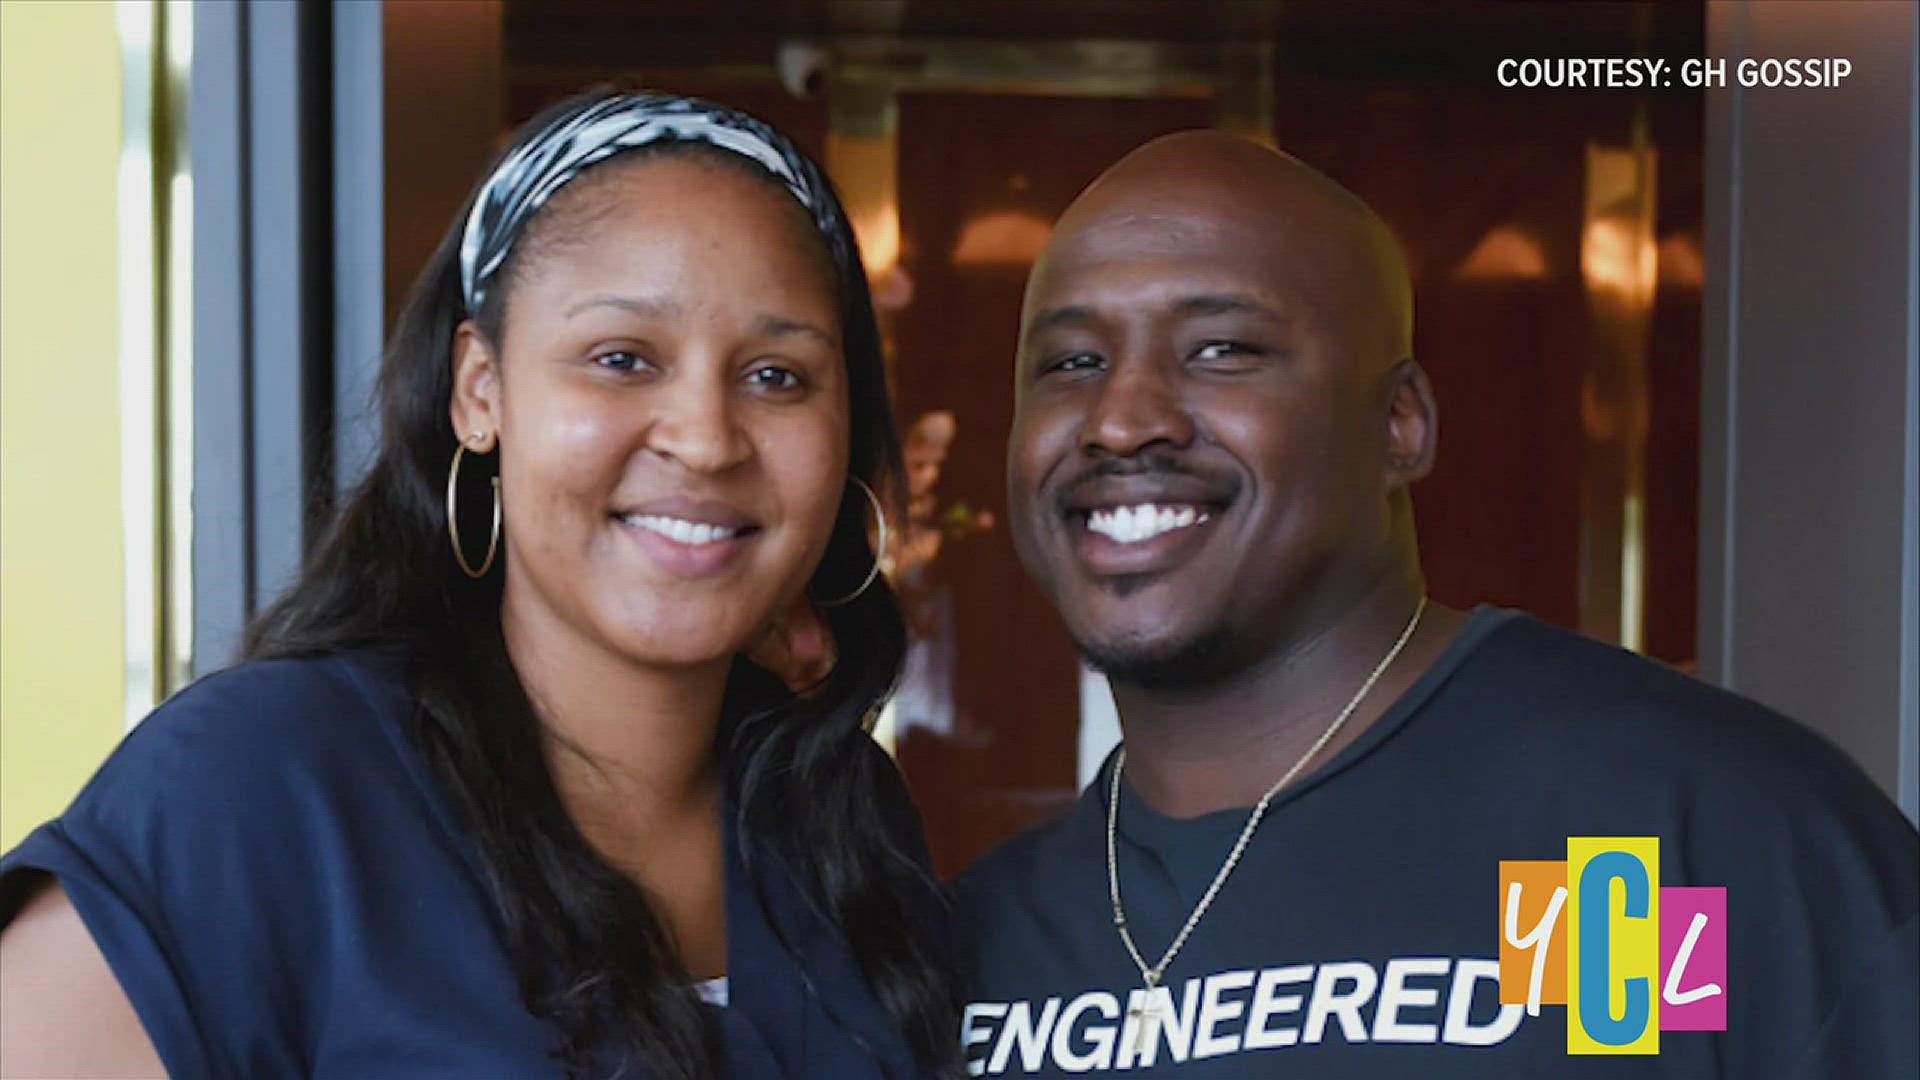 A journey for justice turned into a love story when Maya Moore, one of the WNBA's brightest stars married Jonathan Irons, the man she helped free from prison.